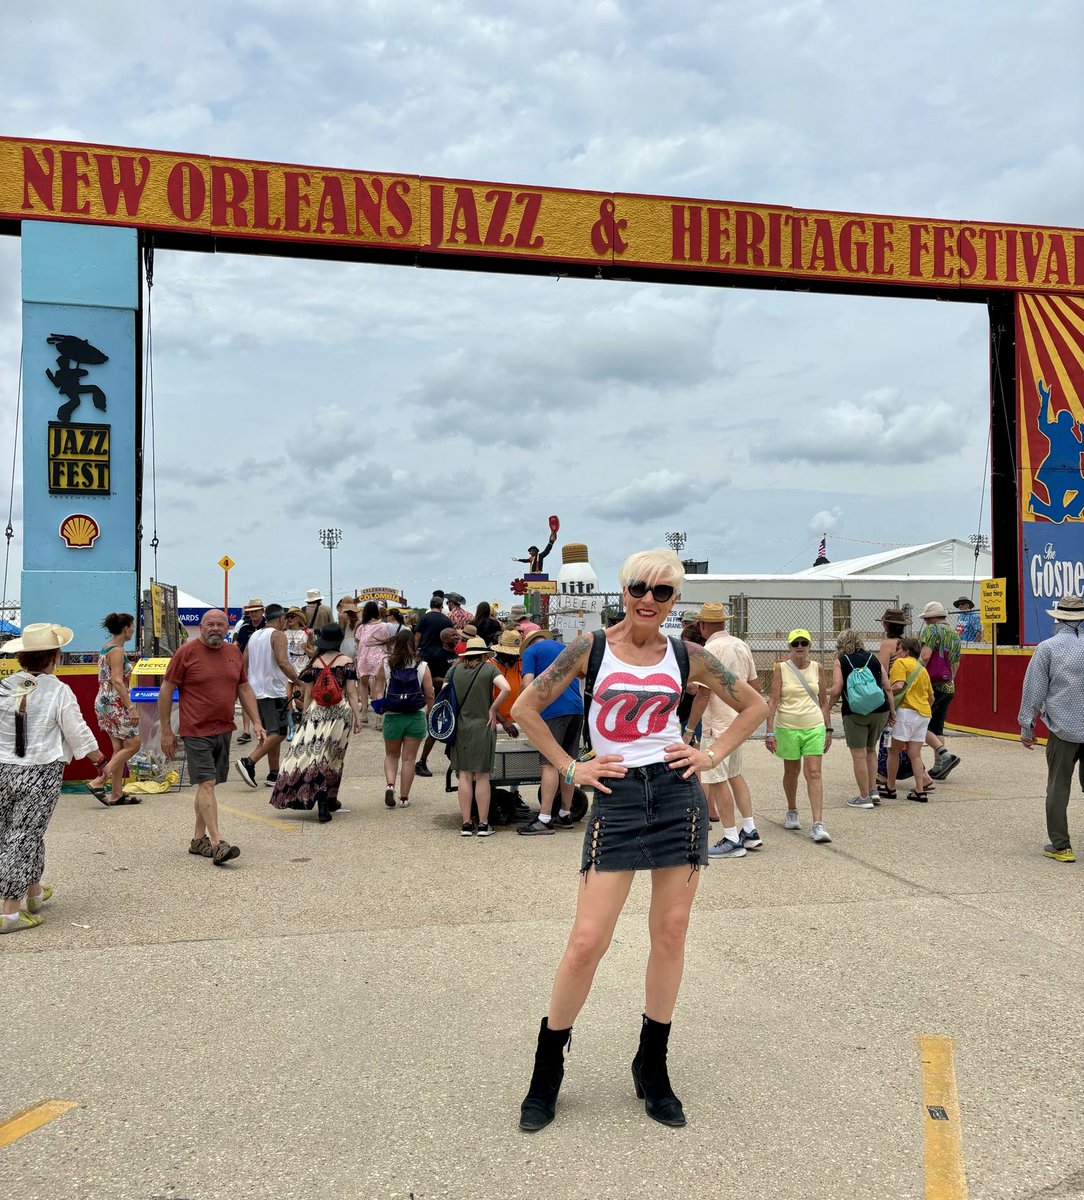 Trying to not make it too obvious what bunking off ⁦@GBNEWS⁩ for this long weekend 😁🎸🇺🇸#RollingStones #NewOrleansJazzFestival #Gbnews #roadtrip #America #NewOrleans #bankholiday